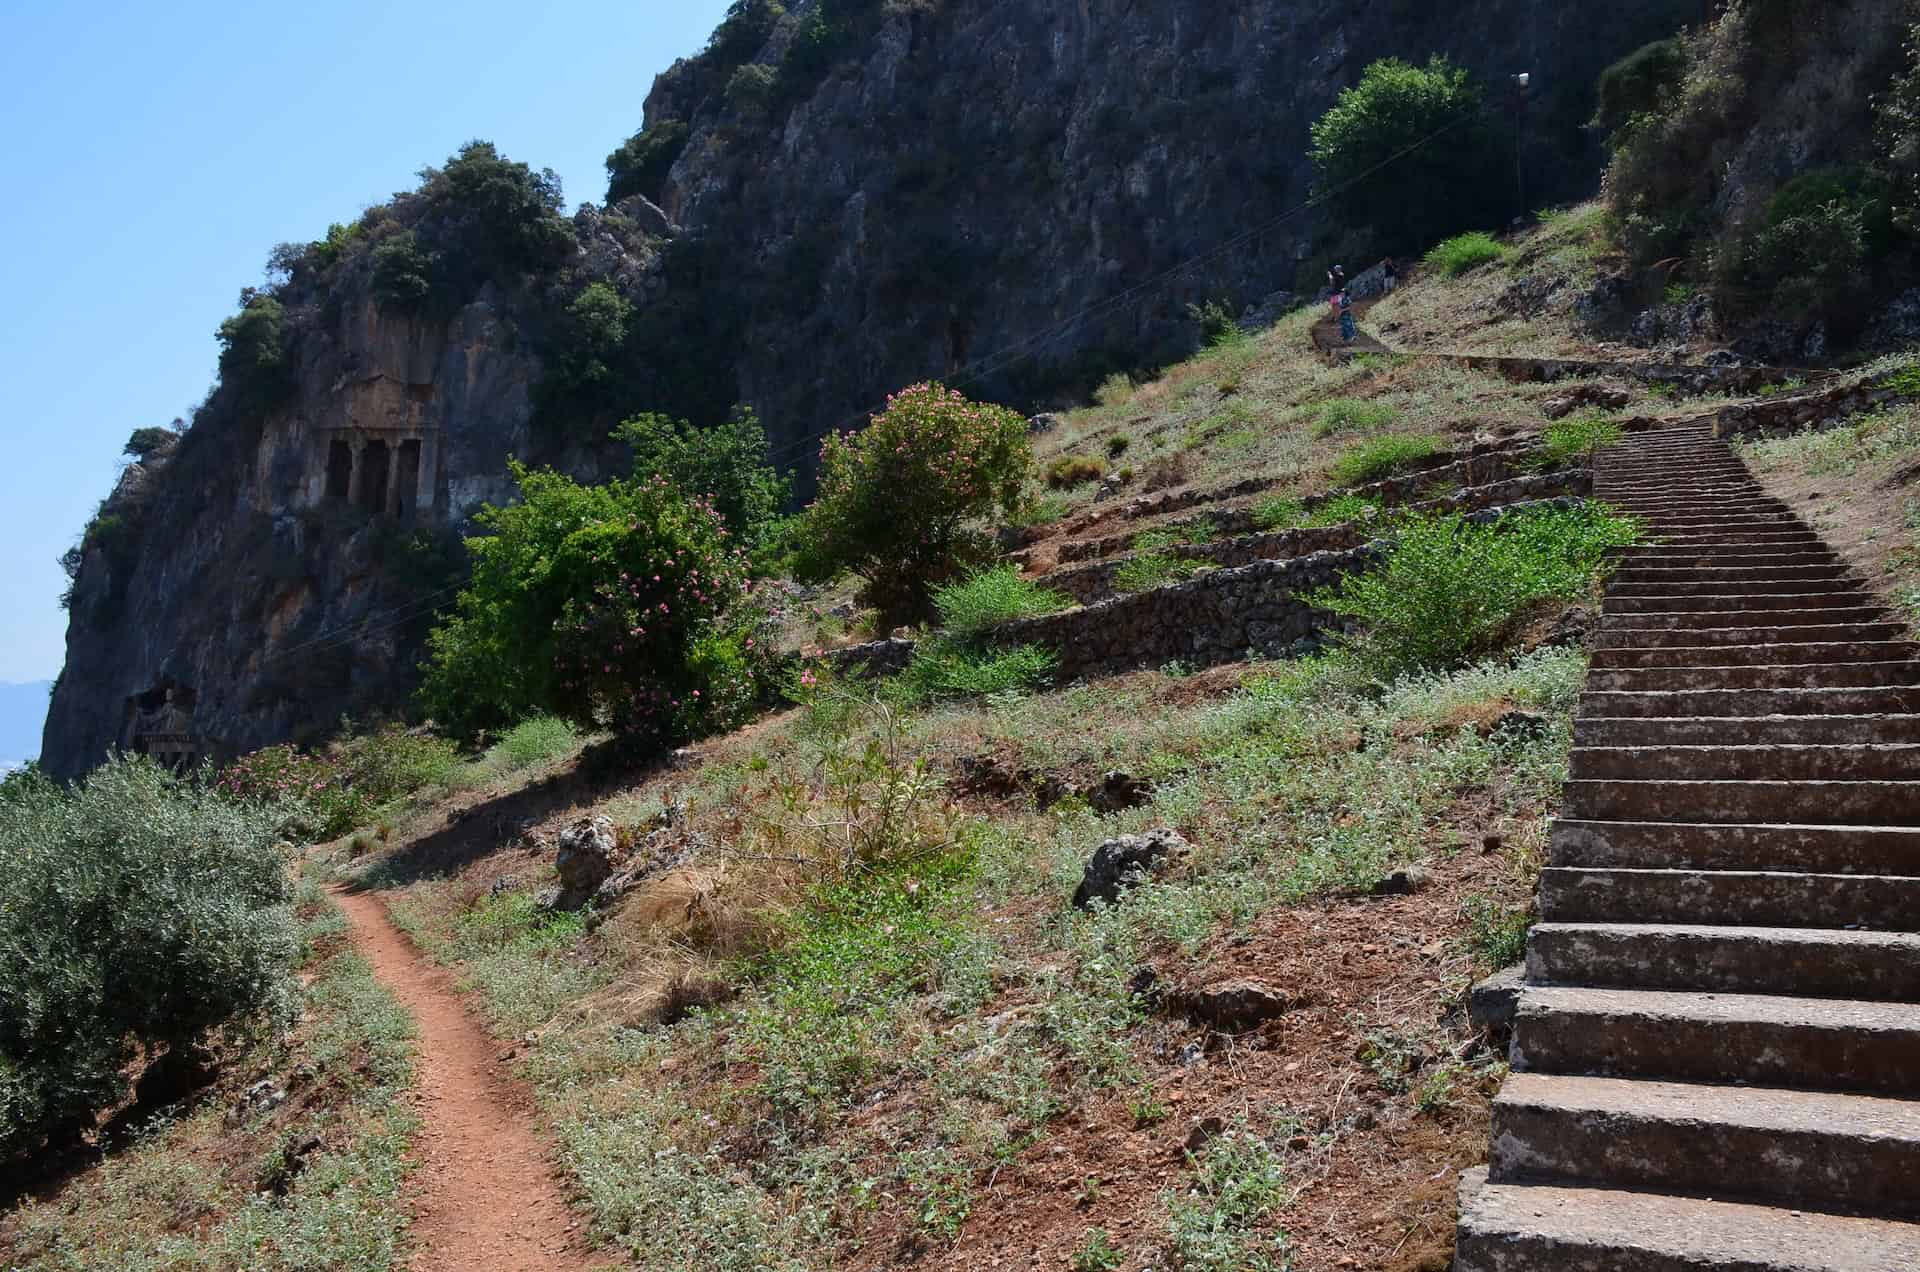 Path through the site of the Amyntas Rock Tombs